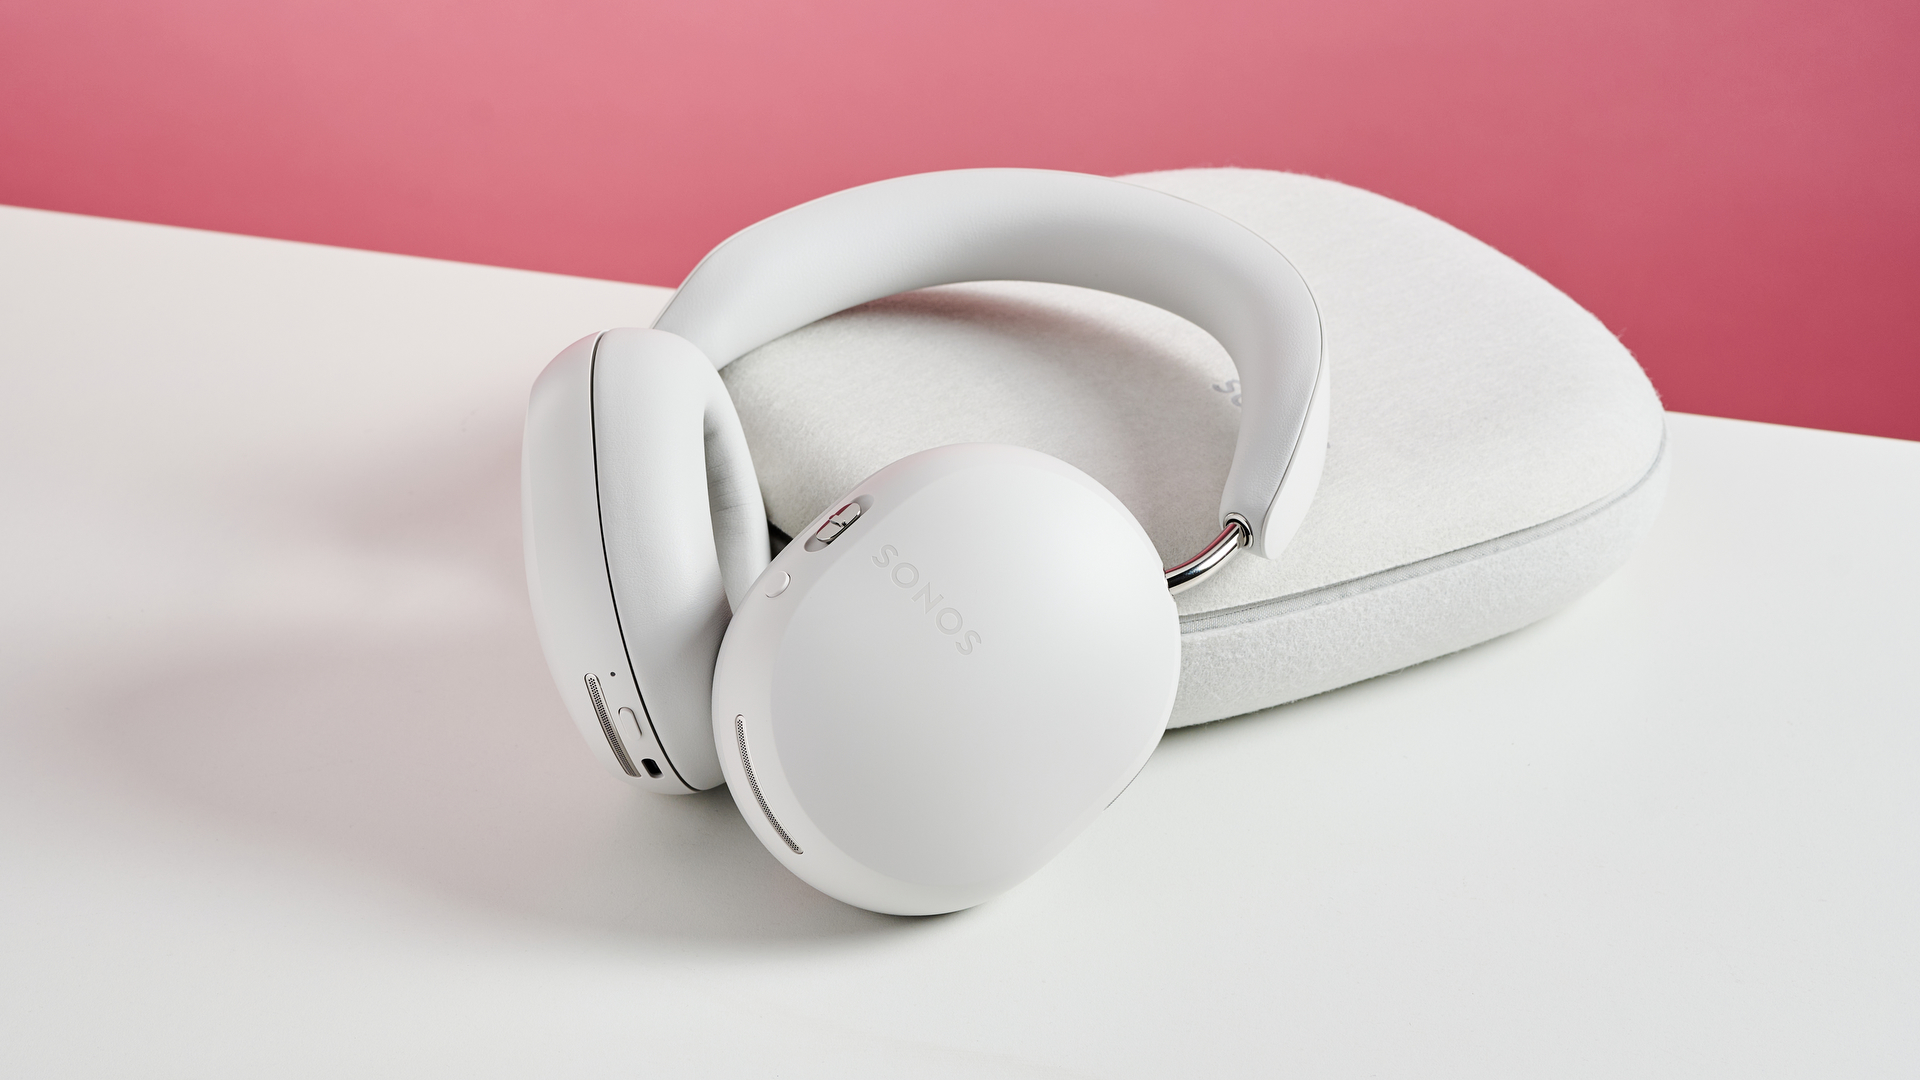 I tried Sonos Ace headphones, and they might convert me to loving to over-ears